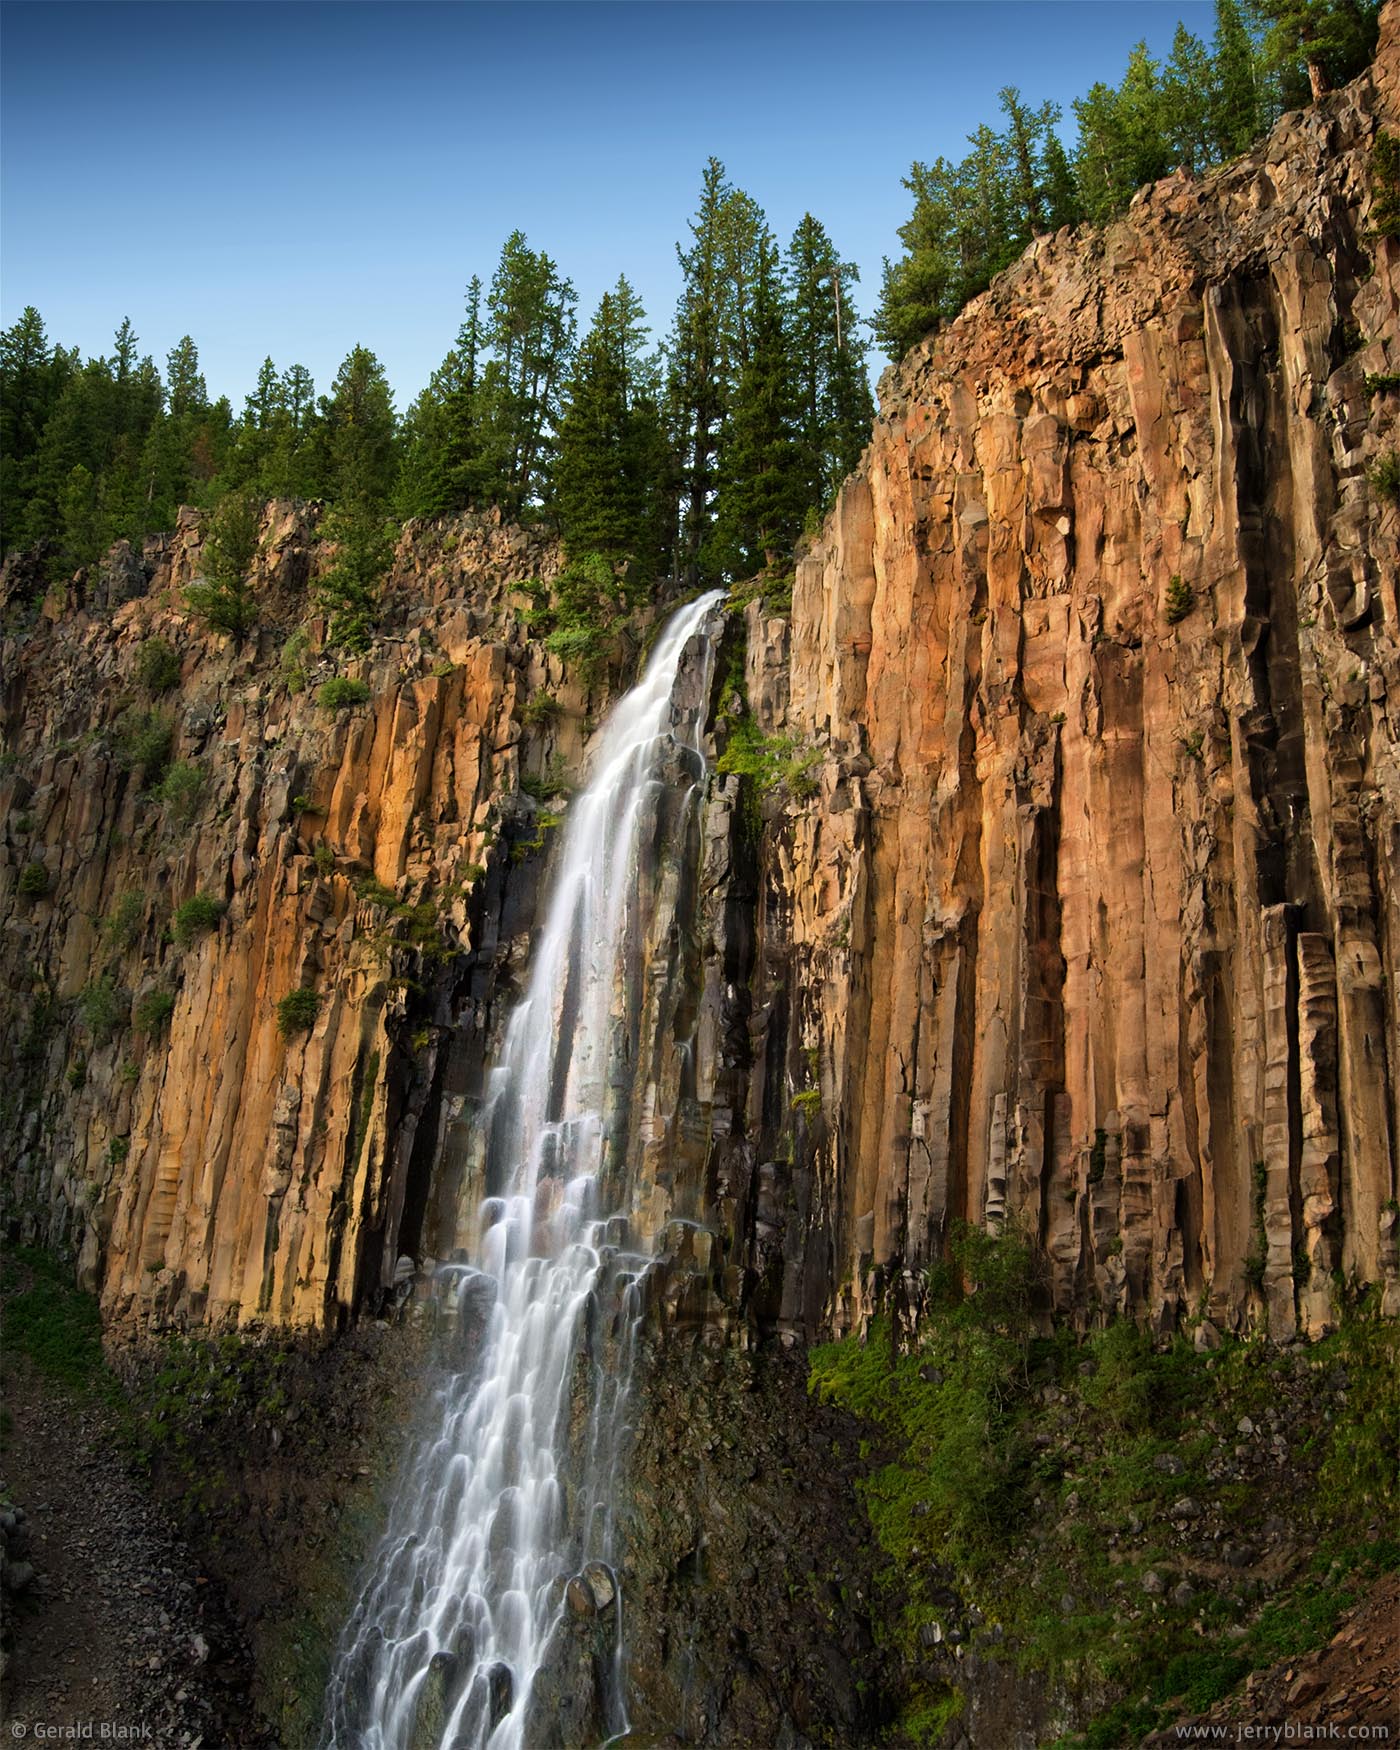 #00643 - A summer evening at Palisade Falls in Hyalite Canyon, Custer Gallatin National Forest, Montana - photo by Jerry Blank